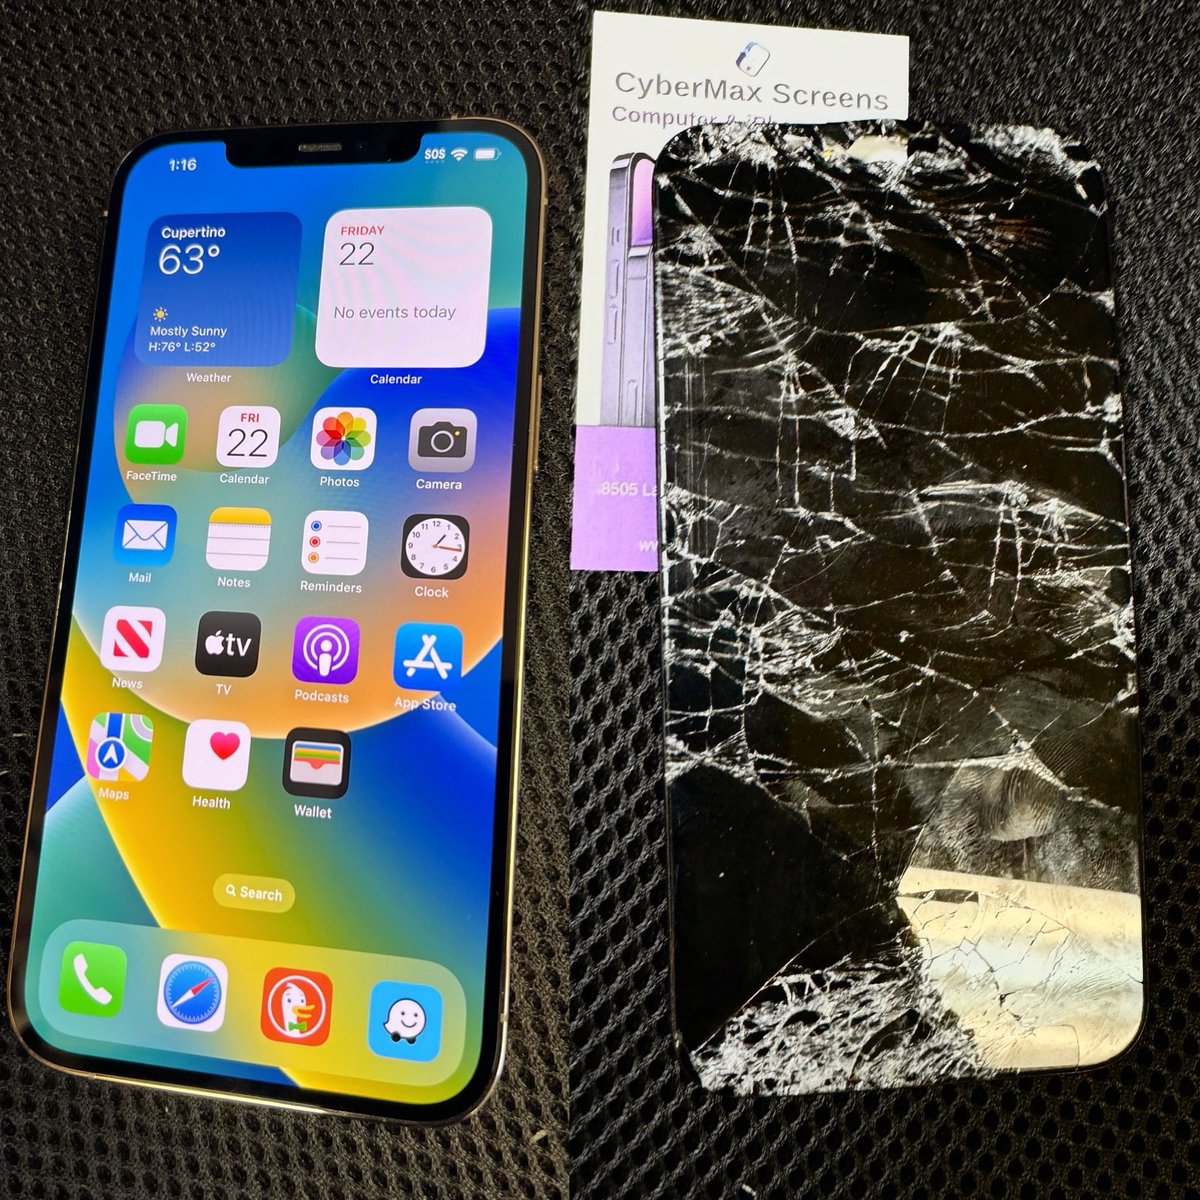 CyberMax Screens in Charlotte, NC Near Mint Hill, NC and Matthews NC offer Same Day Cell Phone Repair Services, iPhone Repair etc.704-644-5533. 
.
#iphonerepair #charlottenc #cybermaxscreens #cellphonerepair #cybermax #clt #minthillnc #matthewsnc
#iphone #appleiphone #cellphone